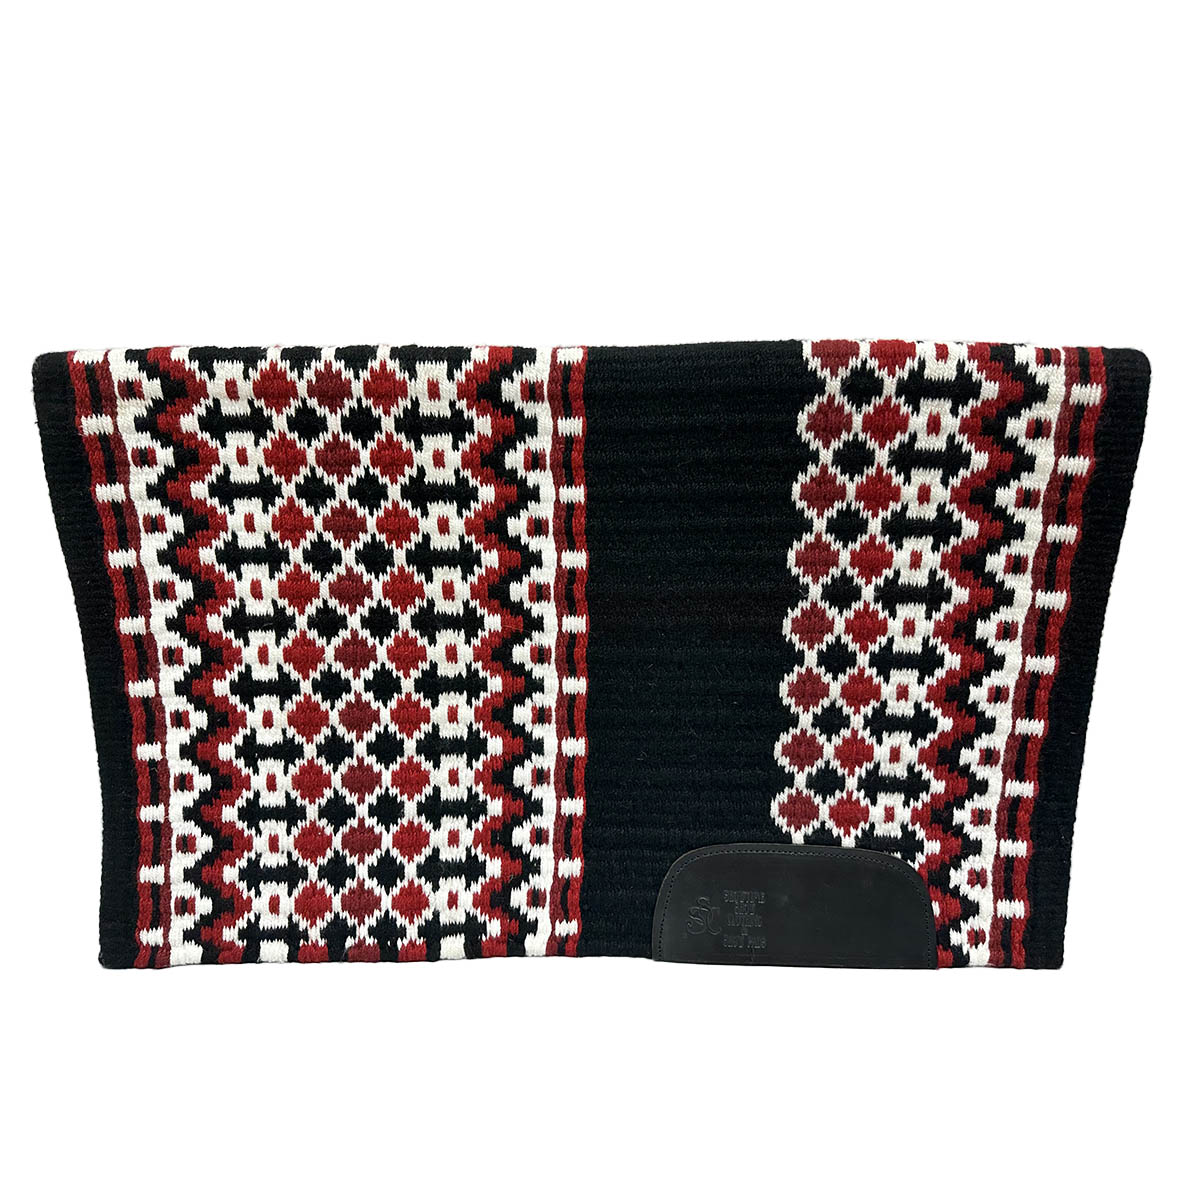 Red, Black, and White Saddle Pad with Diamond Pattern